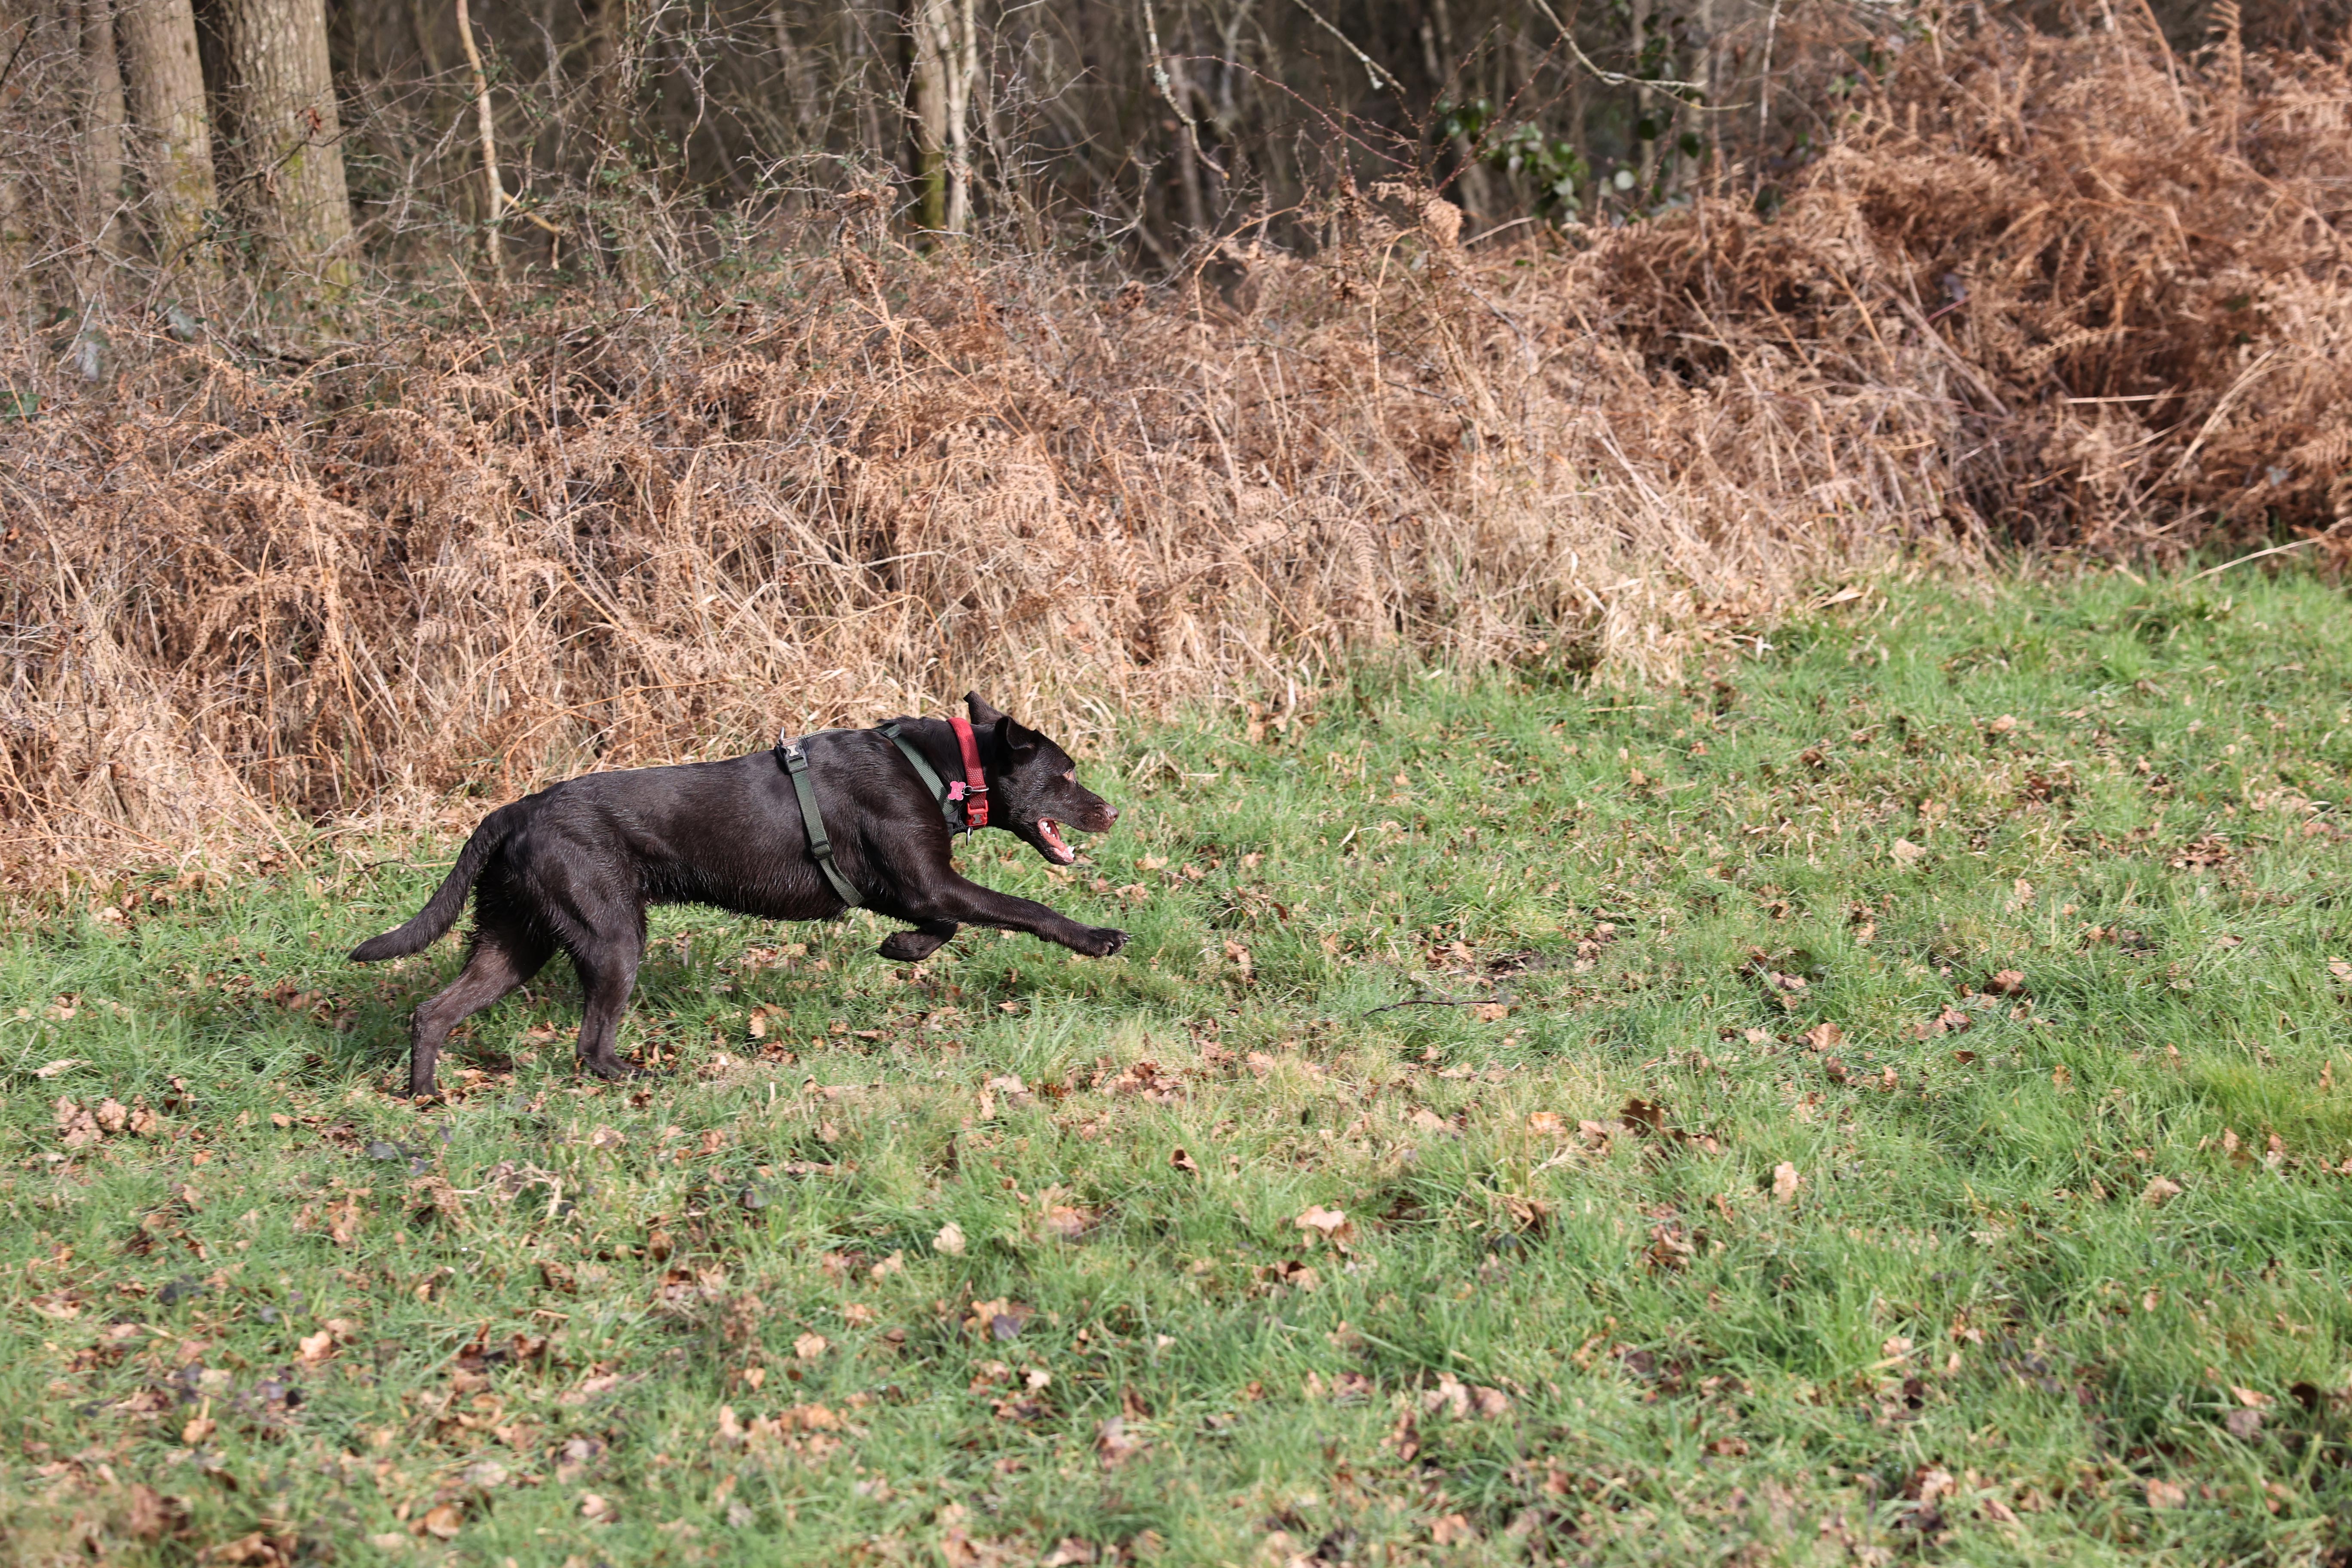 A shot taken with the Canon EOS R6. It shows a Labrador dog running across the frame